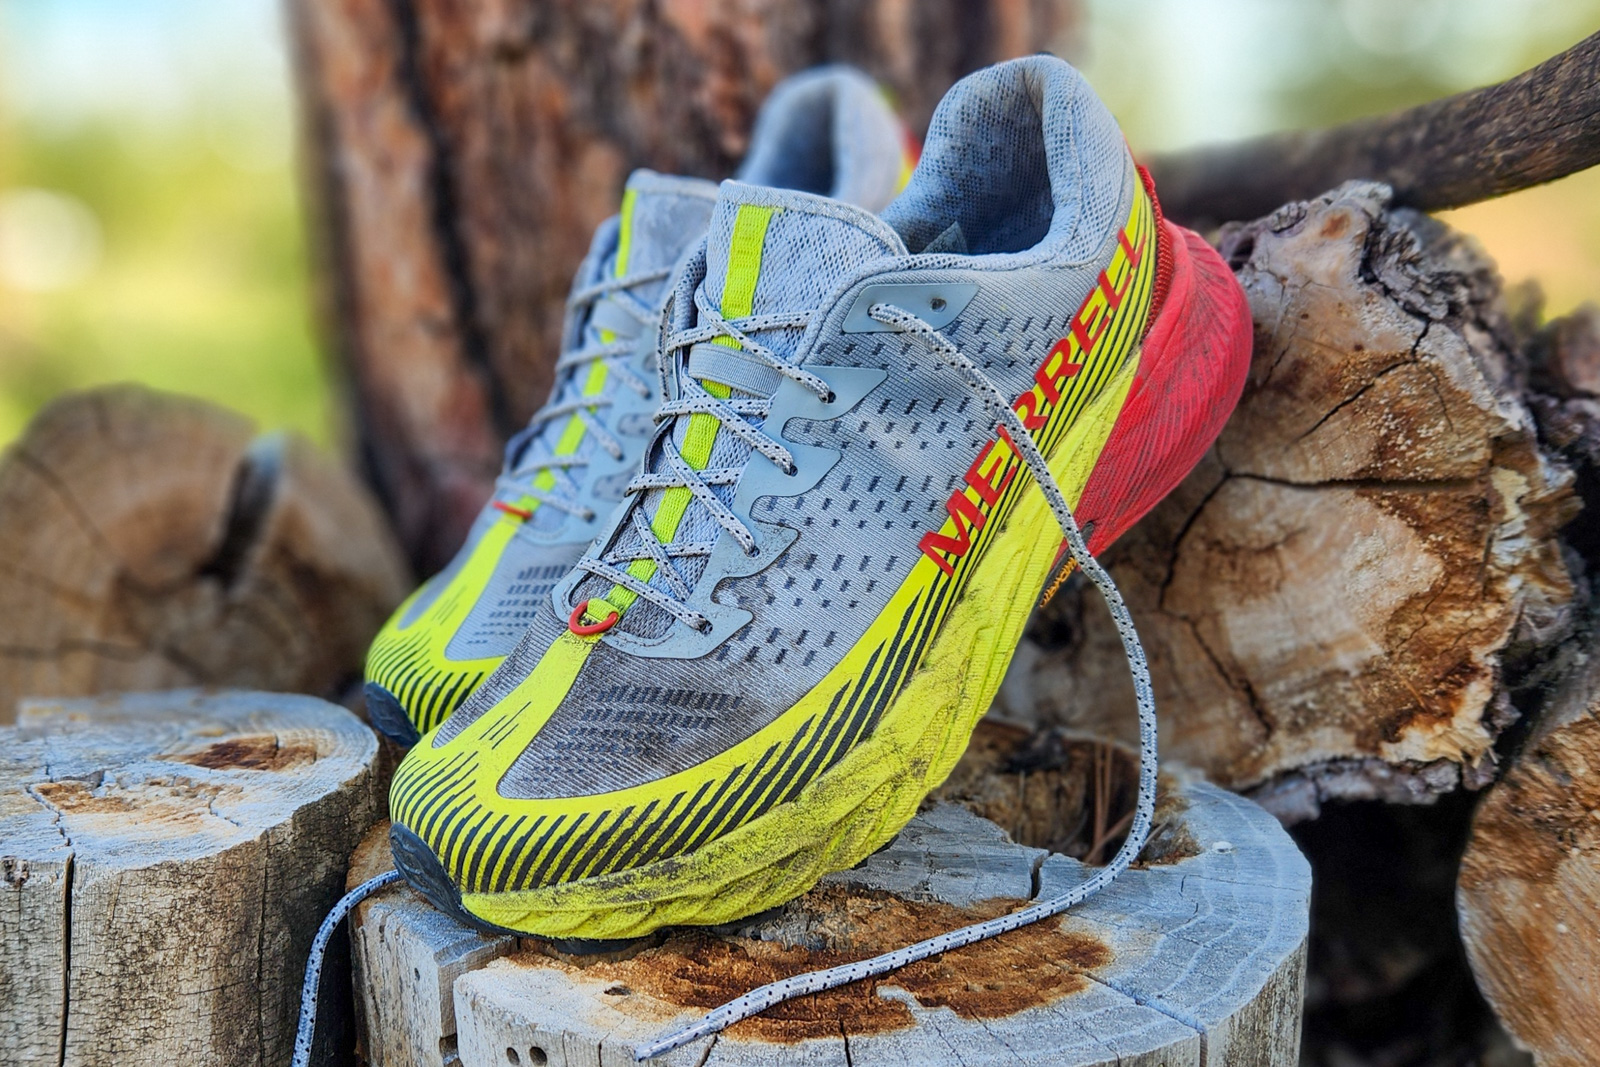 Merrell Agility Peak Review: Serious Flex Appeal - in the Run